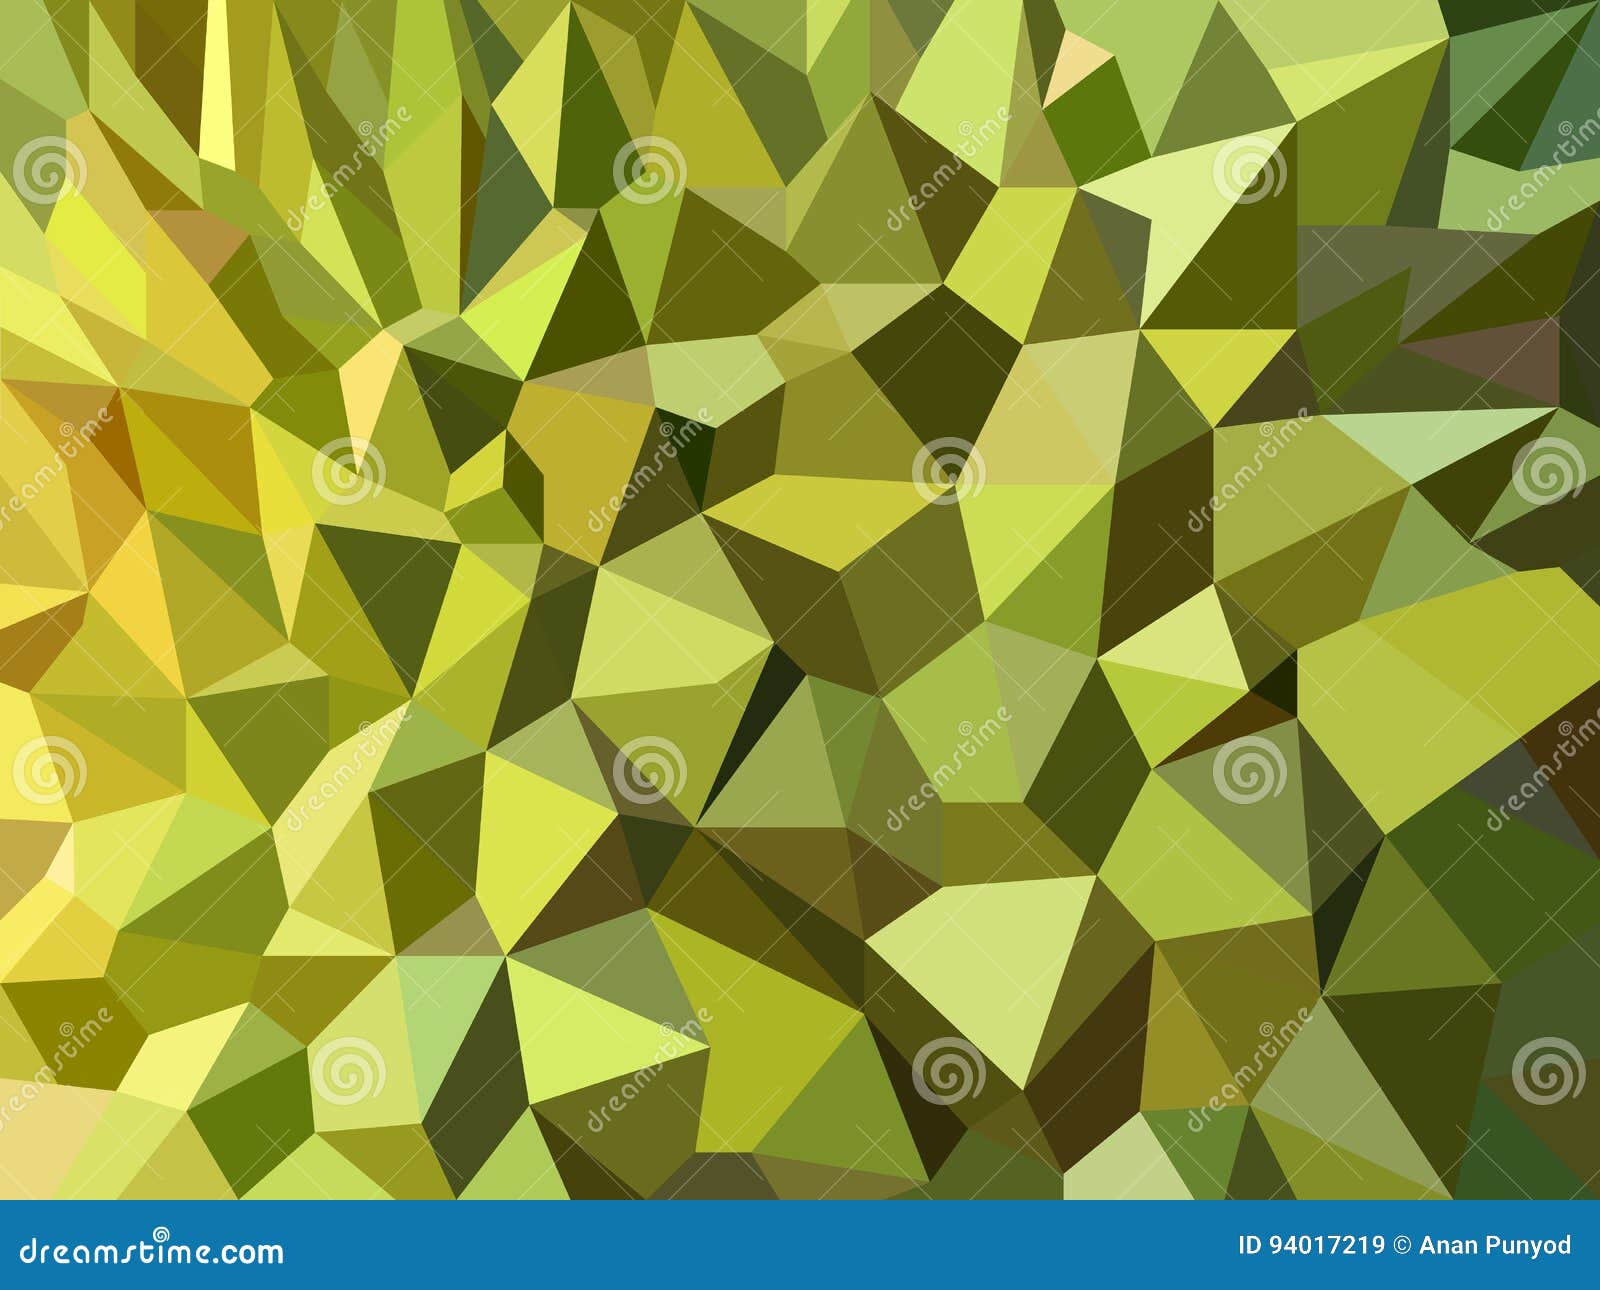 green durian peel low poly abstract background  